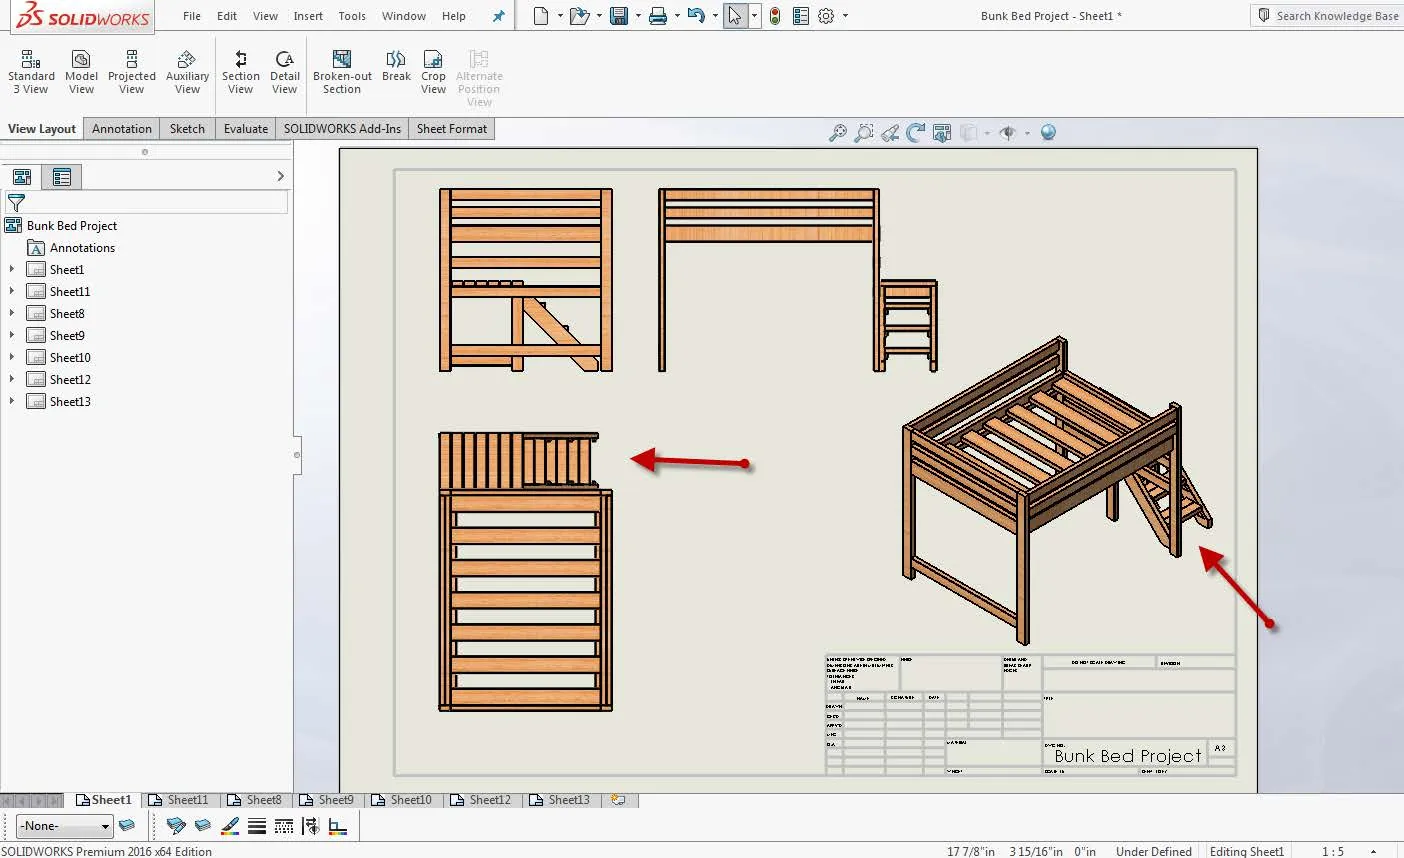 Replacing Model Drawing View in SOLIDWORKS 